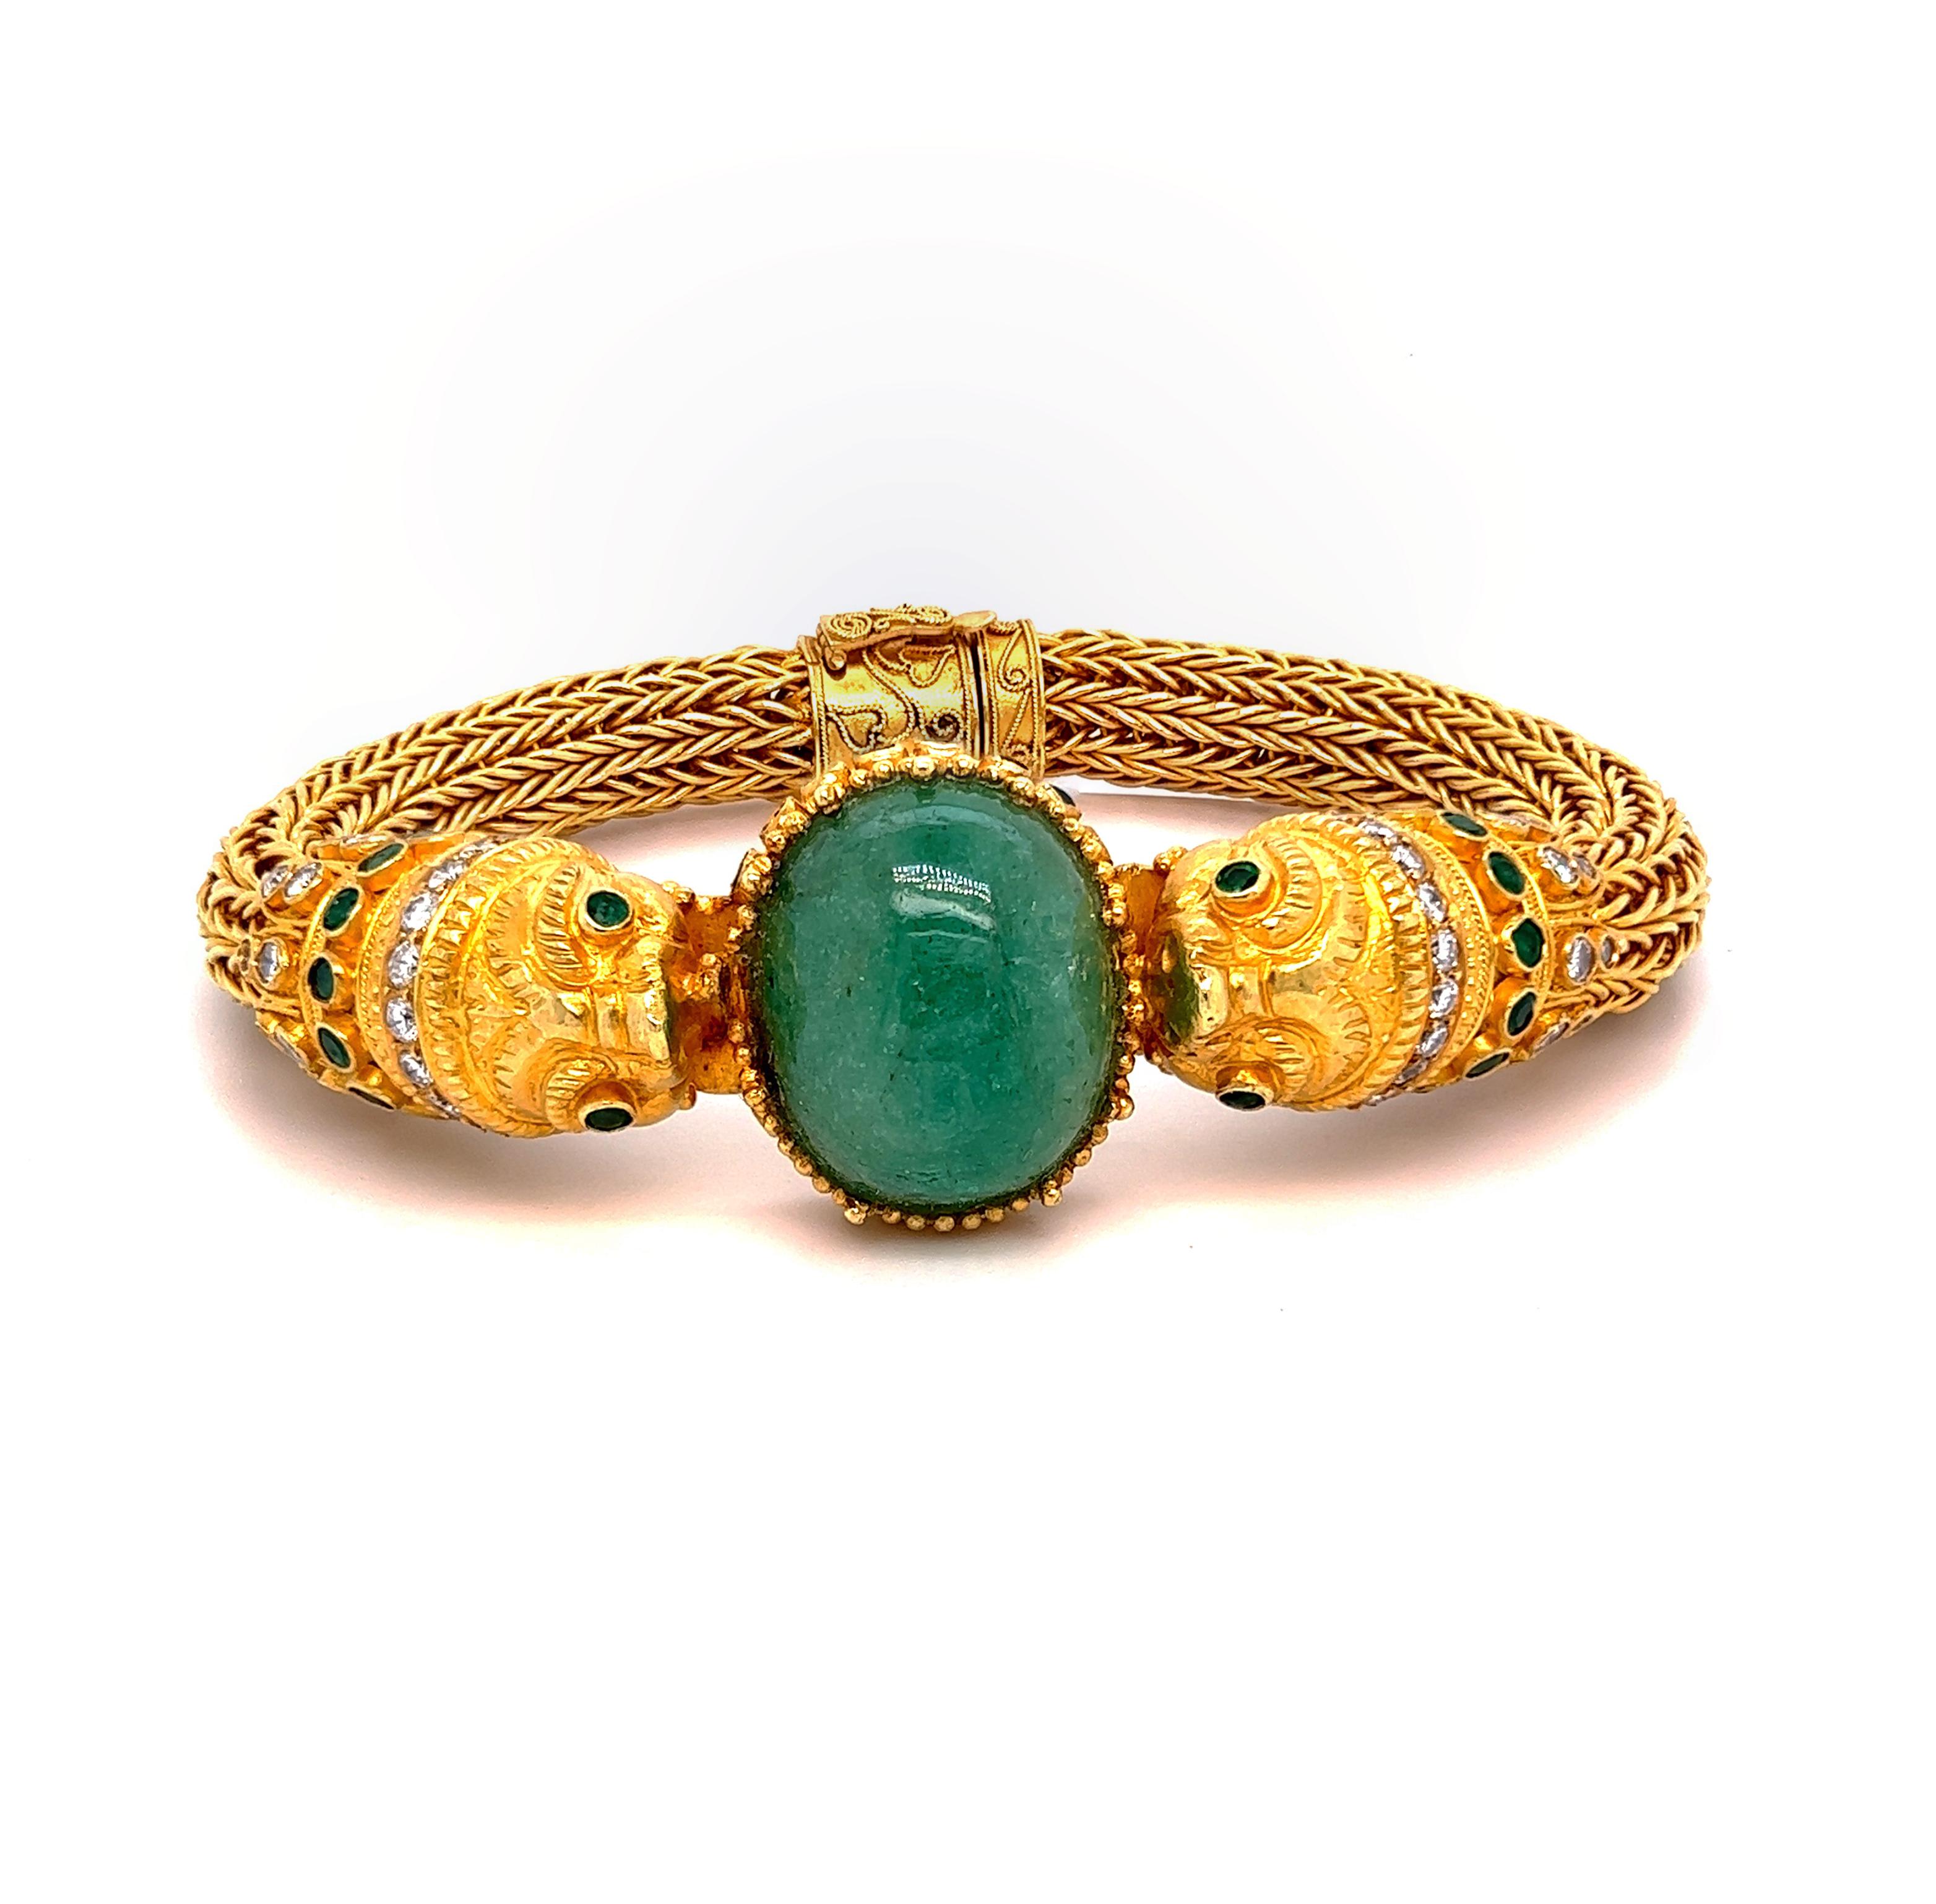 Modern Van Cleef and Arpels 18K Yellow Gold Cabochon Emerald Lion Head Bangle Bracelet For Sale